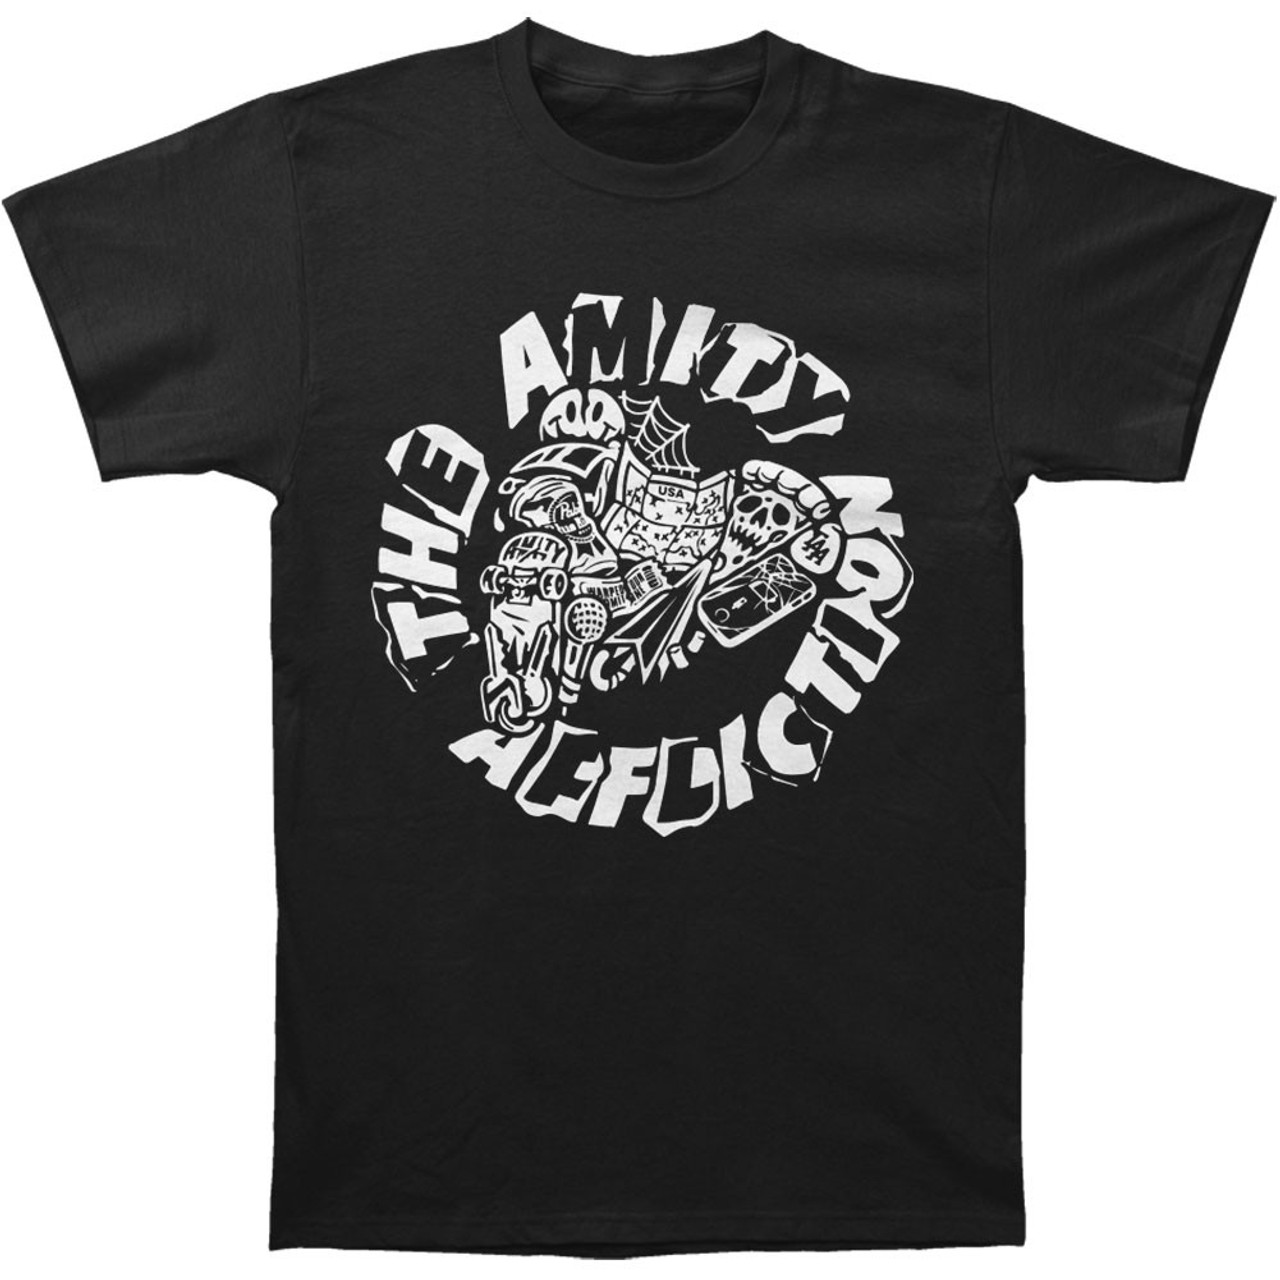 Shop By - Bands - Amity Affliction - Merch2rock Alternative Clothing